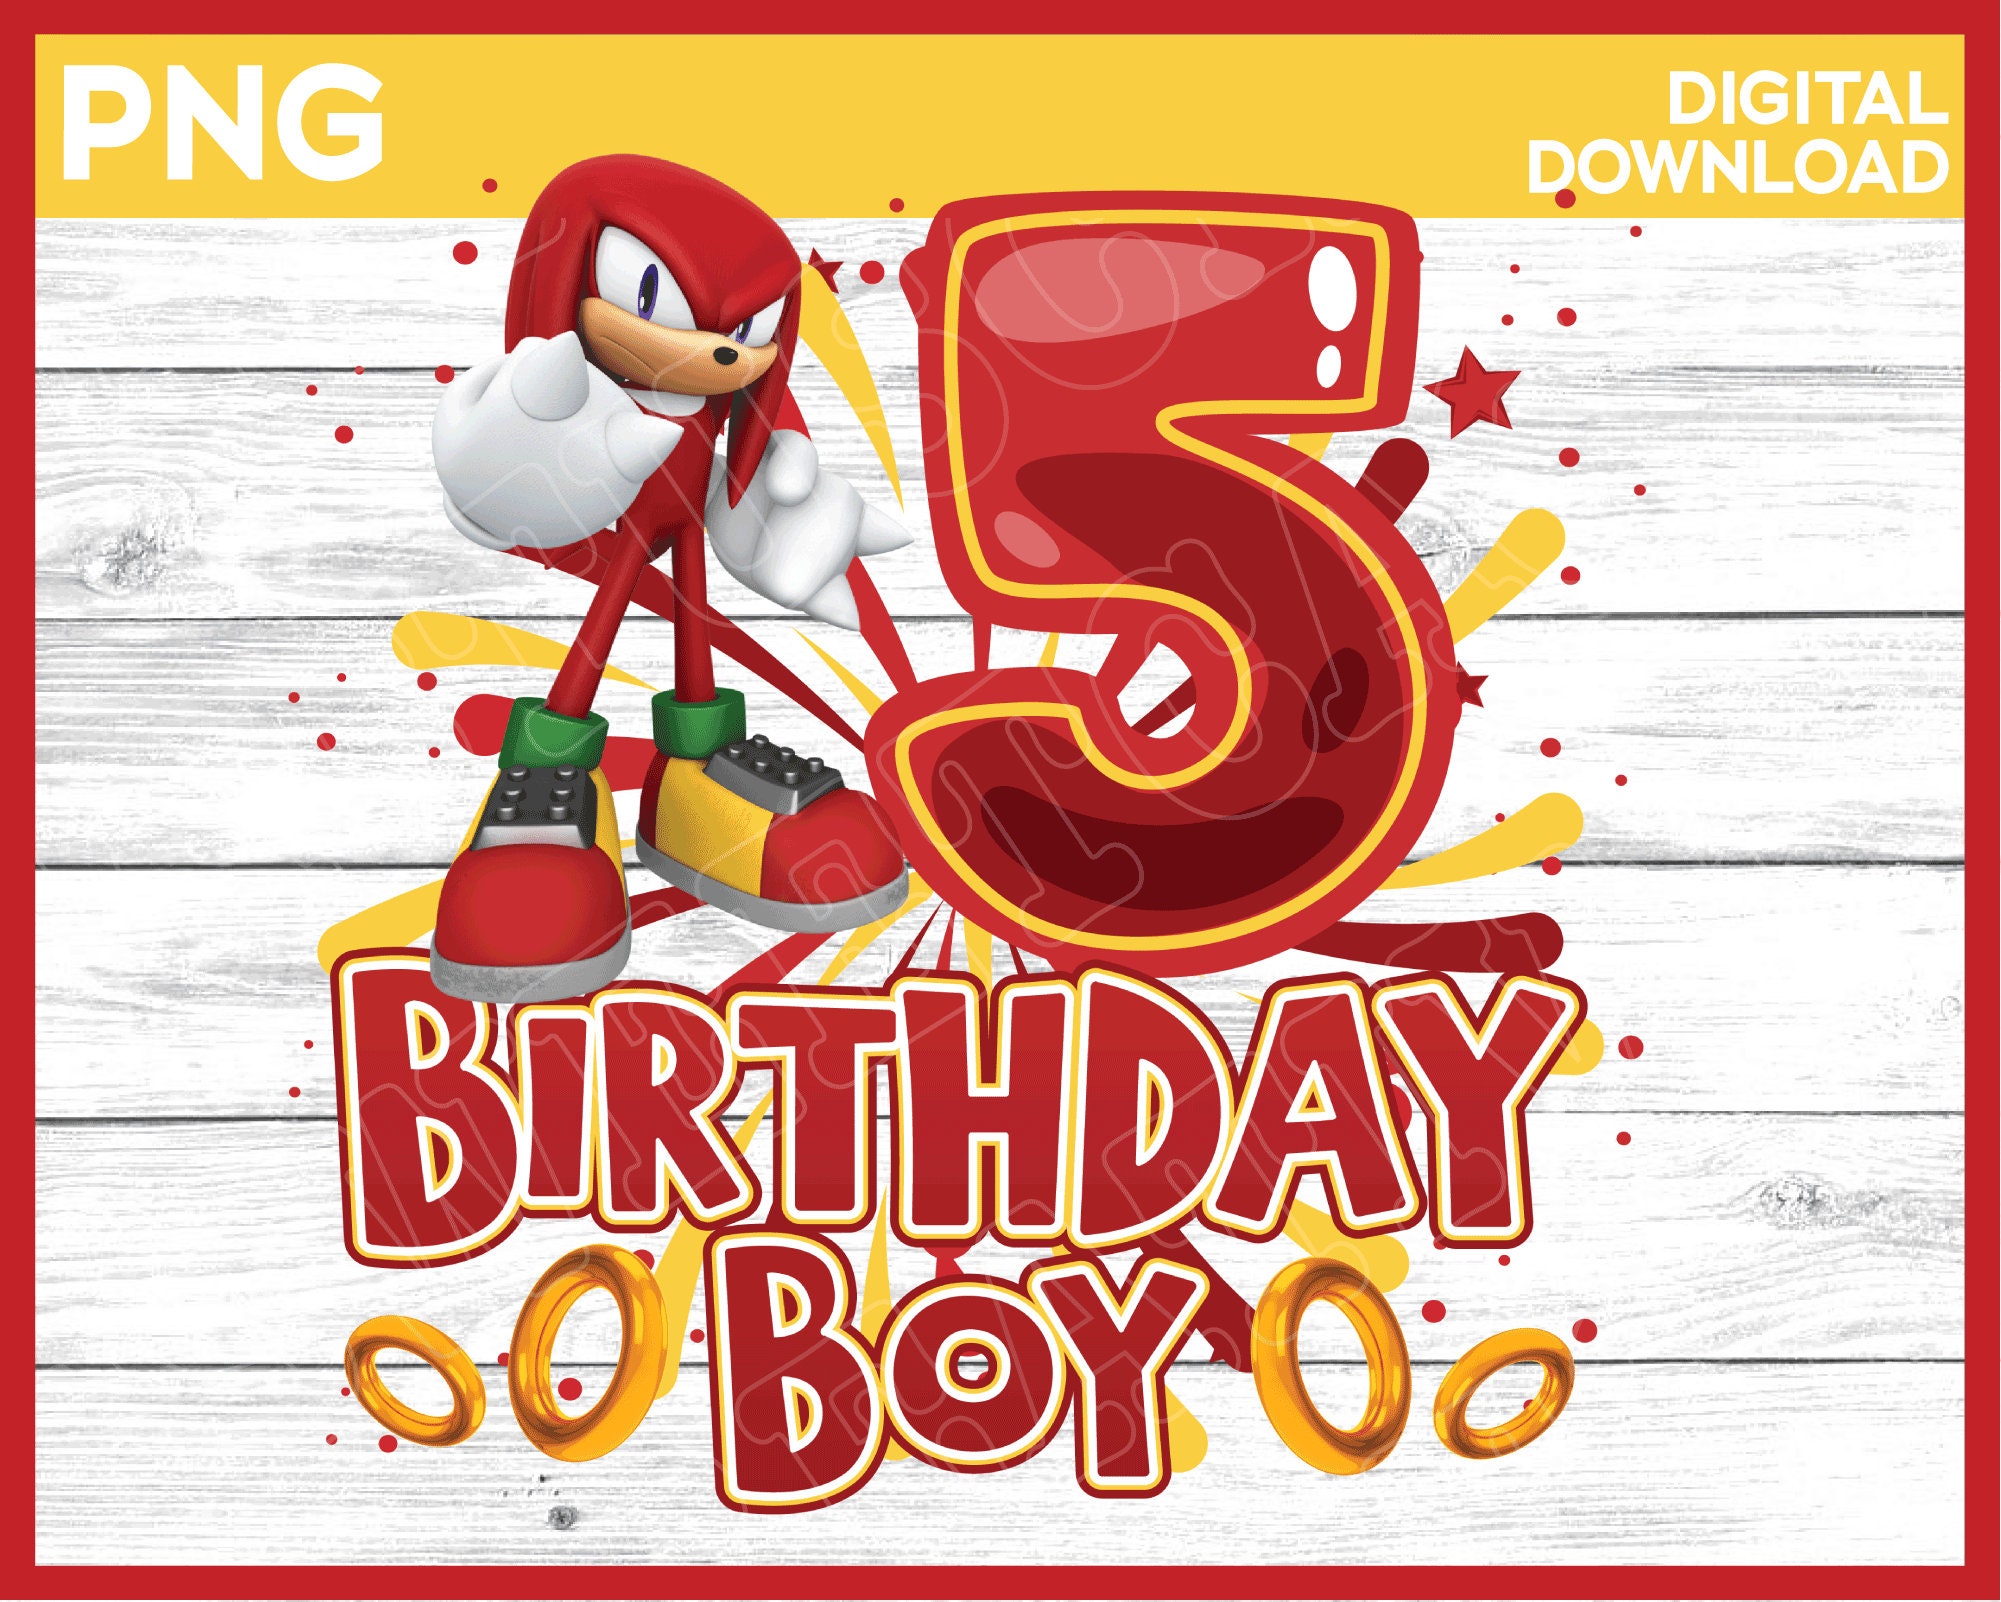 Sonic Movie Birthday Boy, Family Matching PNG, Transparent Background,  Design Bundle Mommy, Daddy, Brother, Sister, Sublimation Instant Download Sonic  Movie Birthday Boy, Family Matching PNG, Transparent Background, Design  Bundle Mommy, Daddy, Brother